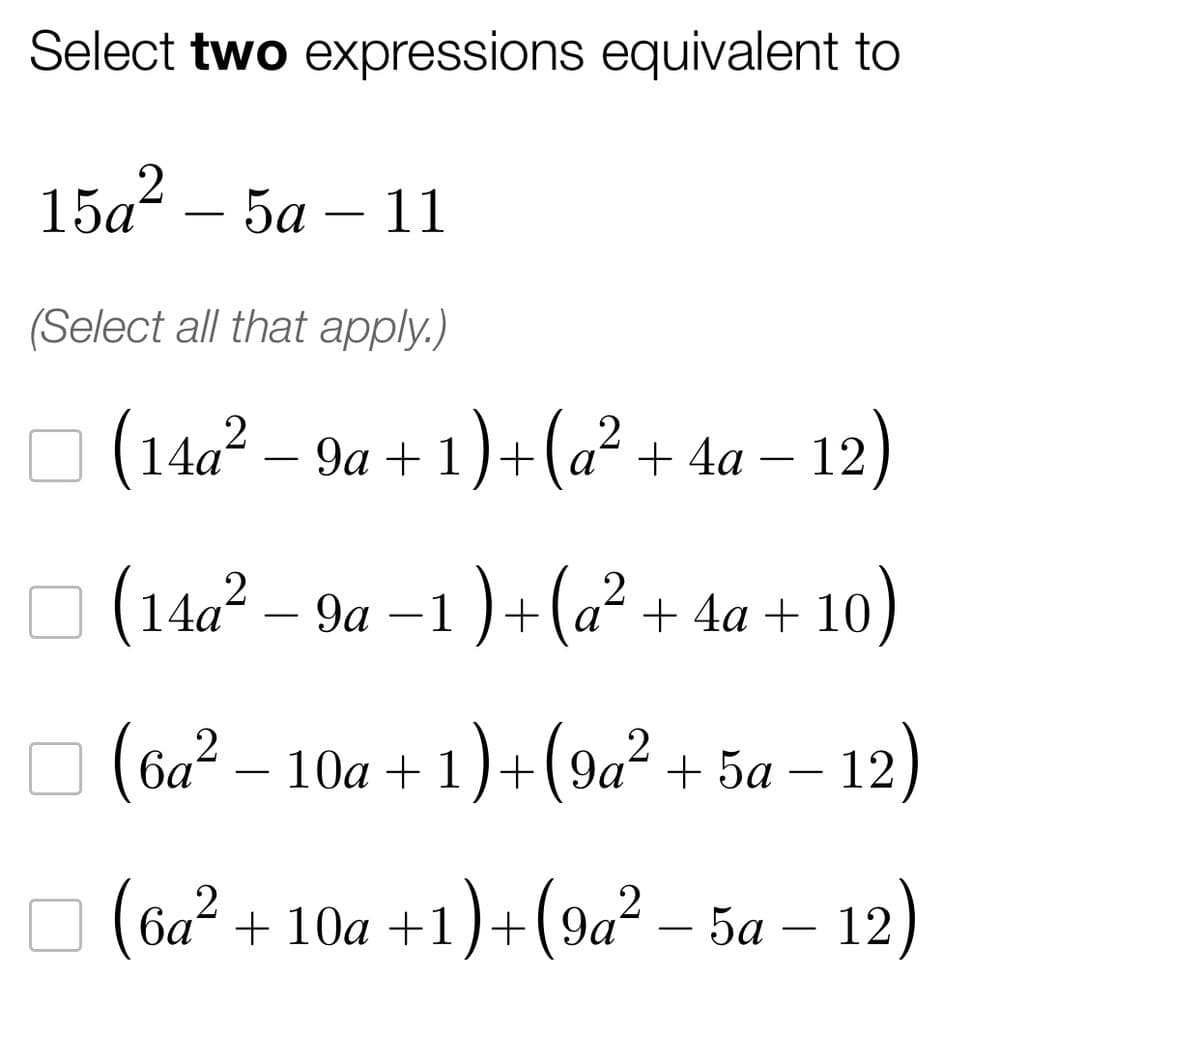 Select two expressions equivalent to
15a² – 5a - 11
(Select all that apply.)
(14a² − 9a +1)+(a² + 4a − 12)
(14a² − 9a −1 )+(a² + 4a + 10)
(6a² — 10a+1)+(9a² + 5a −12)
(6a² +10a+1)+(9a²-5a - 12)